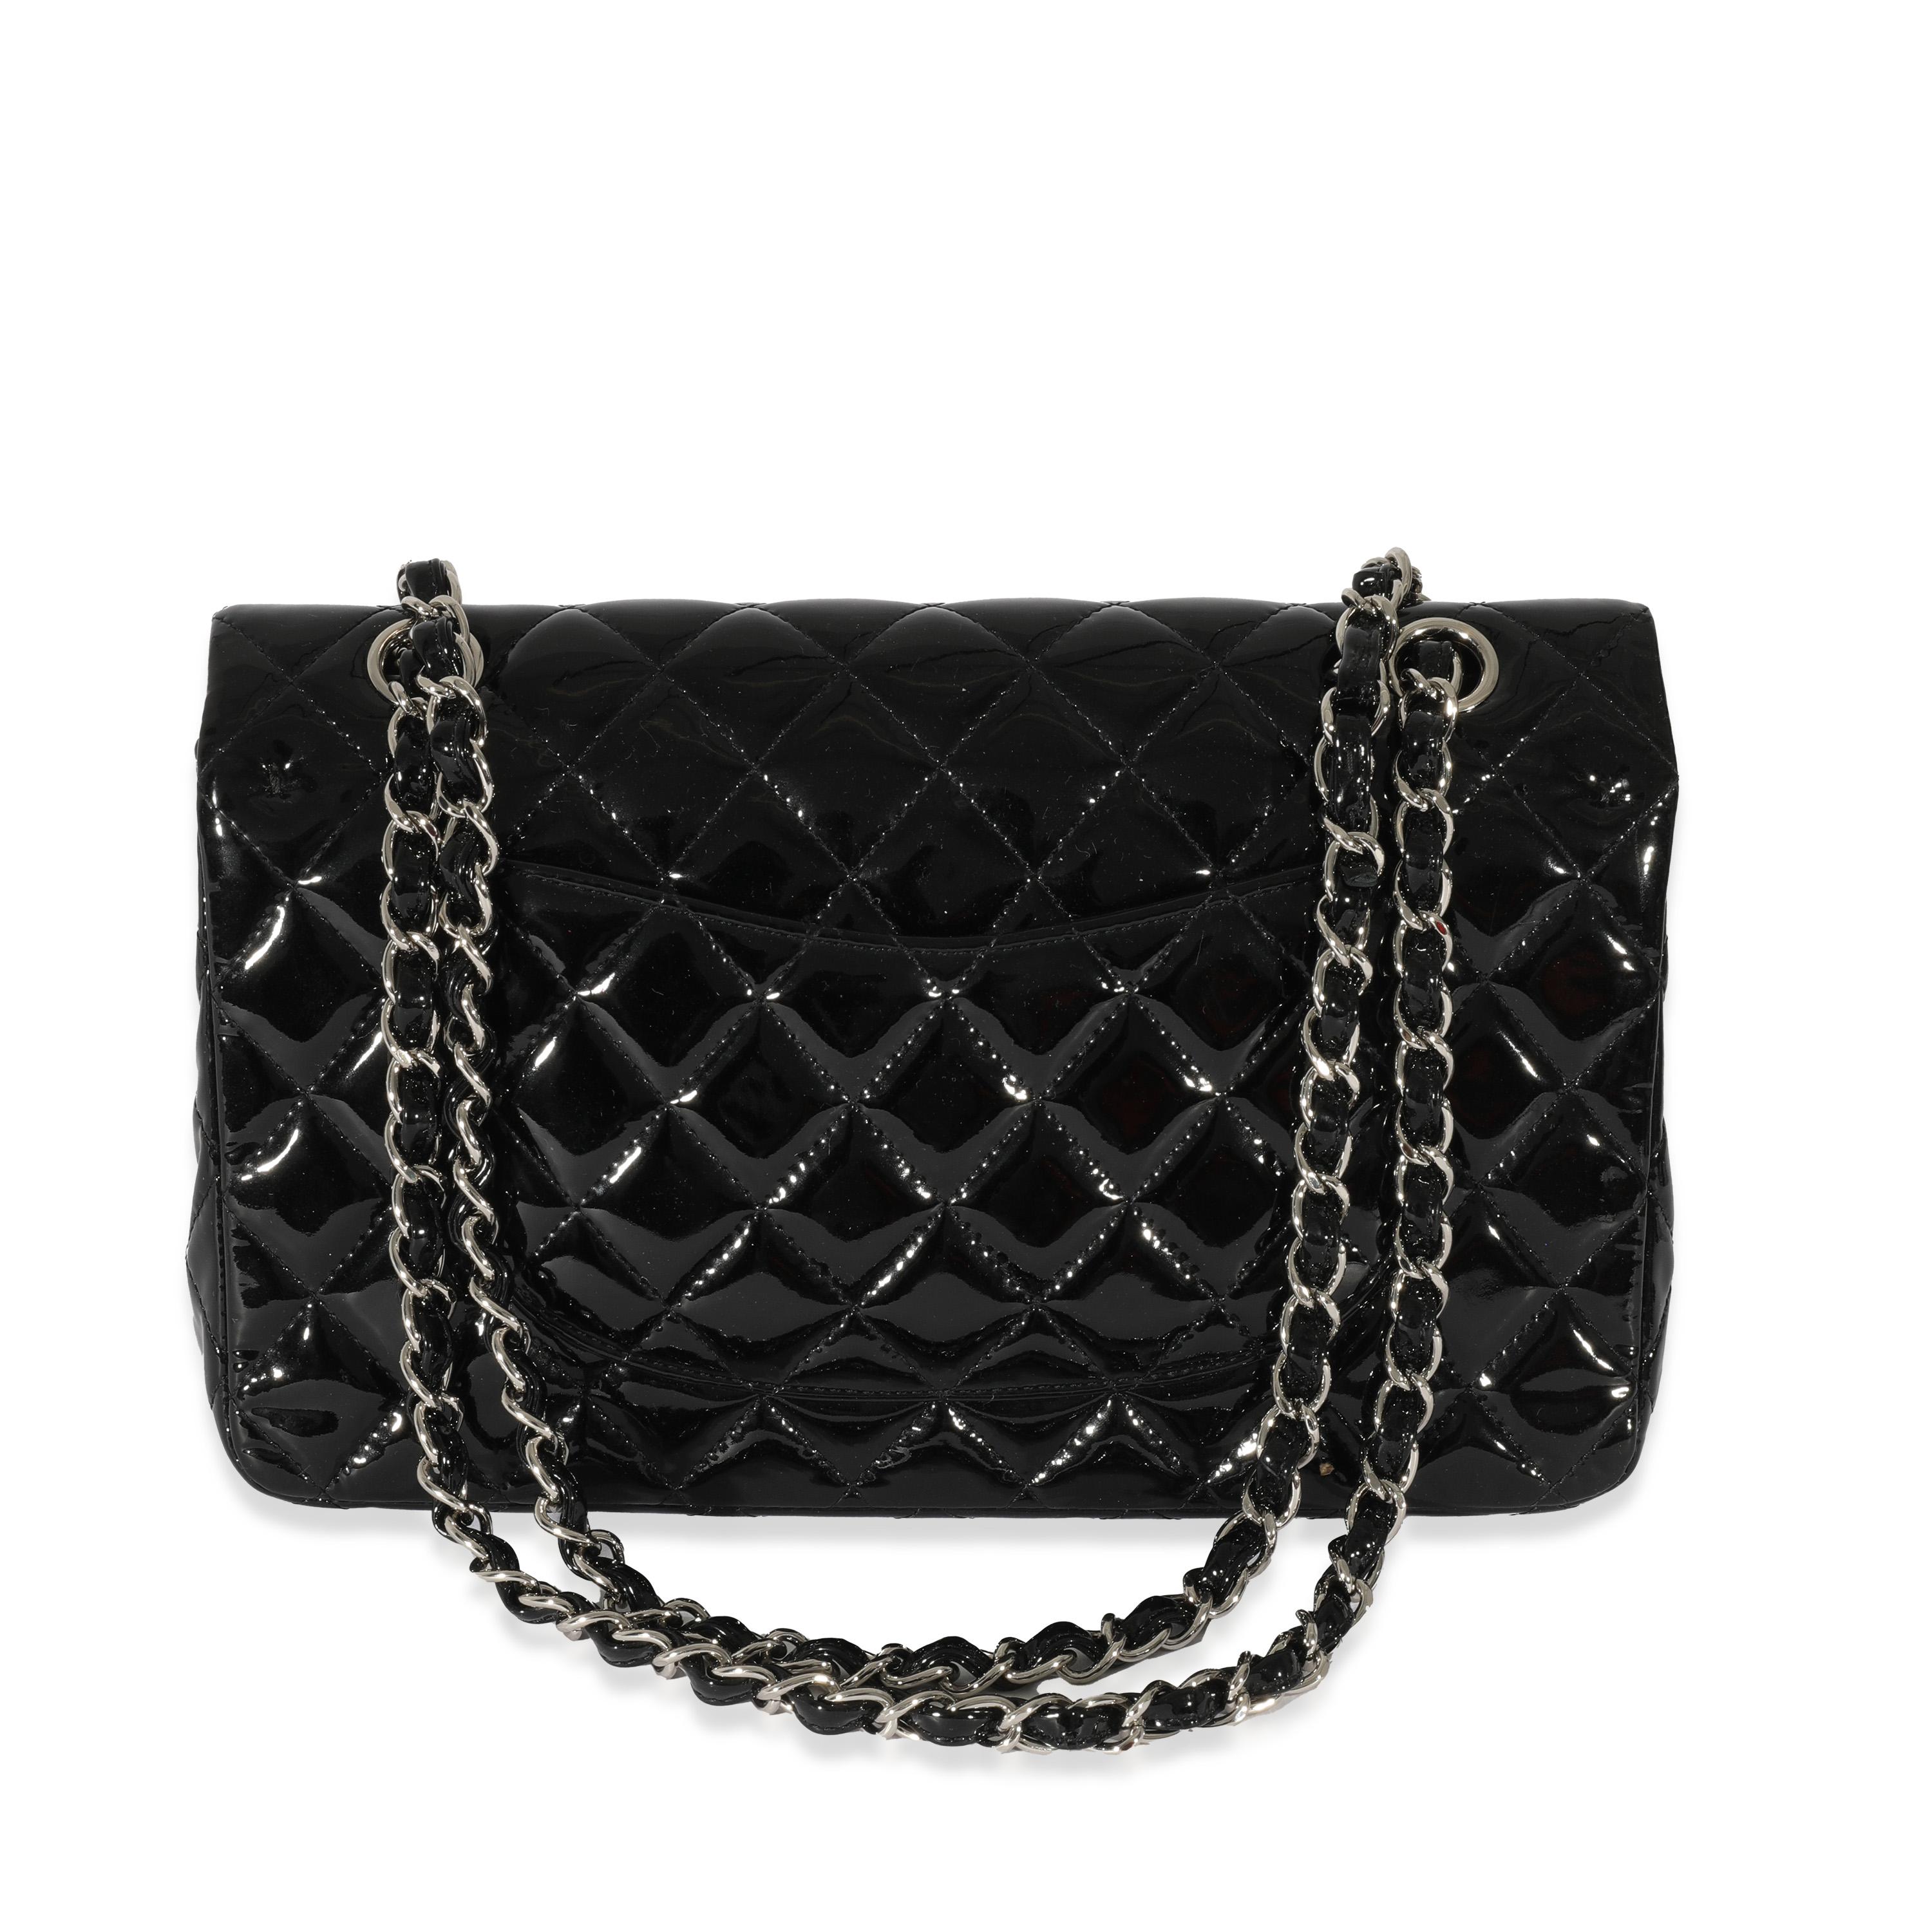 Chanel Black Quilted Patent Leather Medium Classic Double Flap Bag In Excellent Condition For Sale In New York, NY